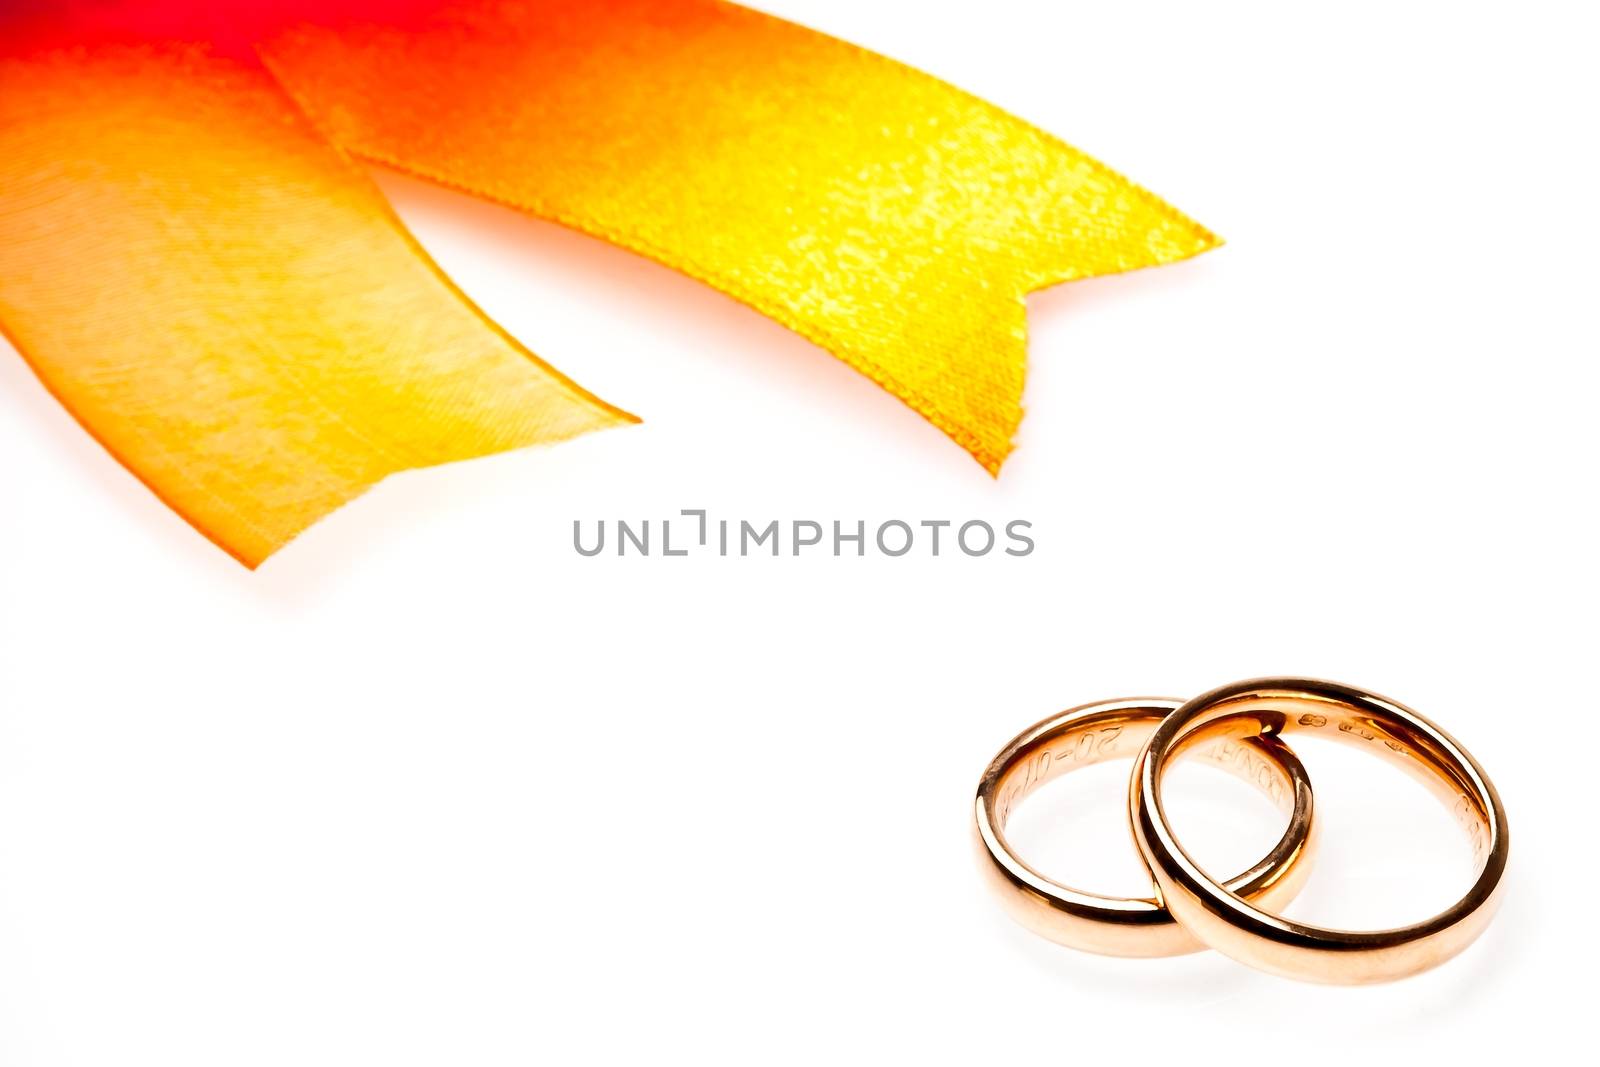 gold wedding rings near ribbon with space for text by donfiore